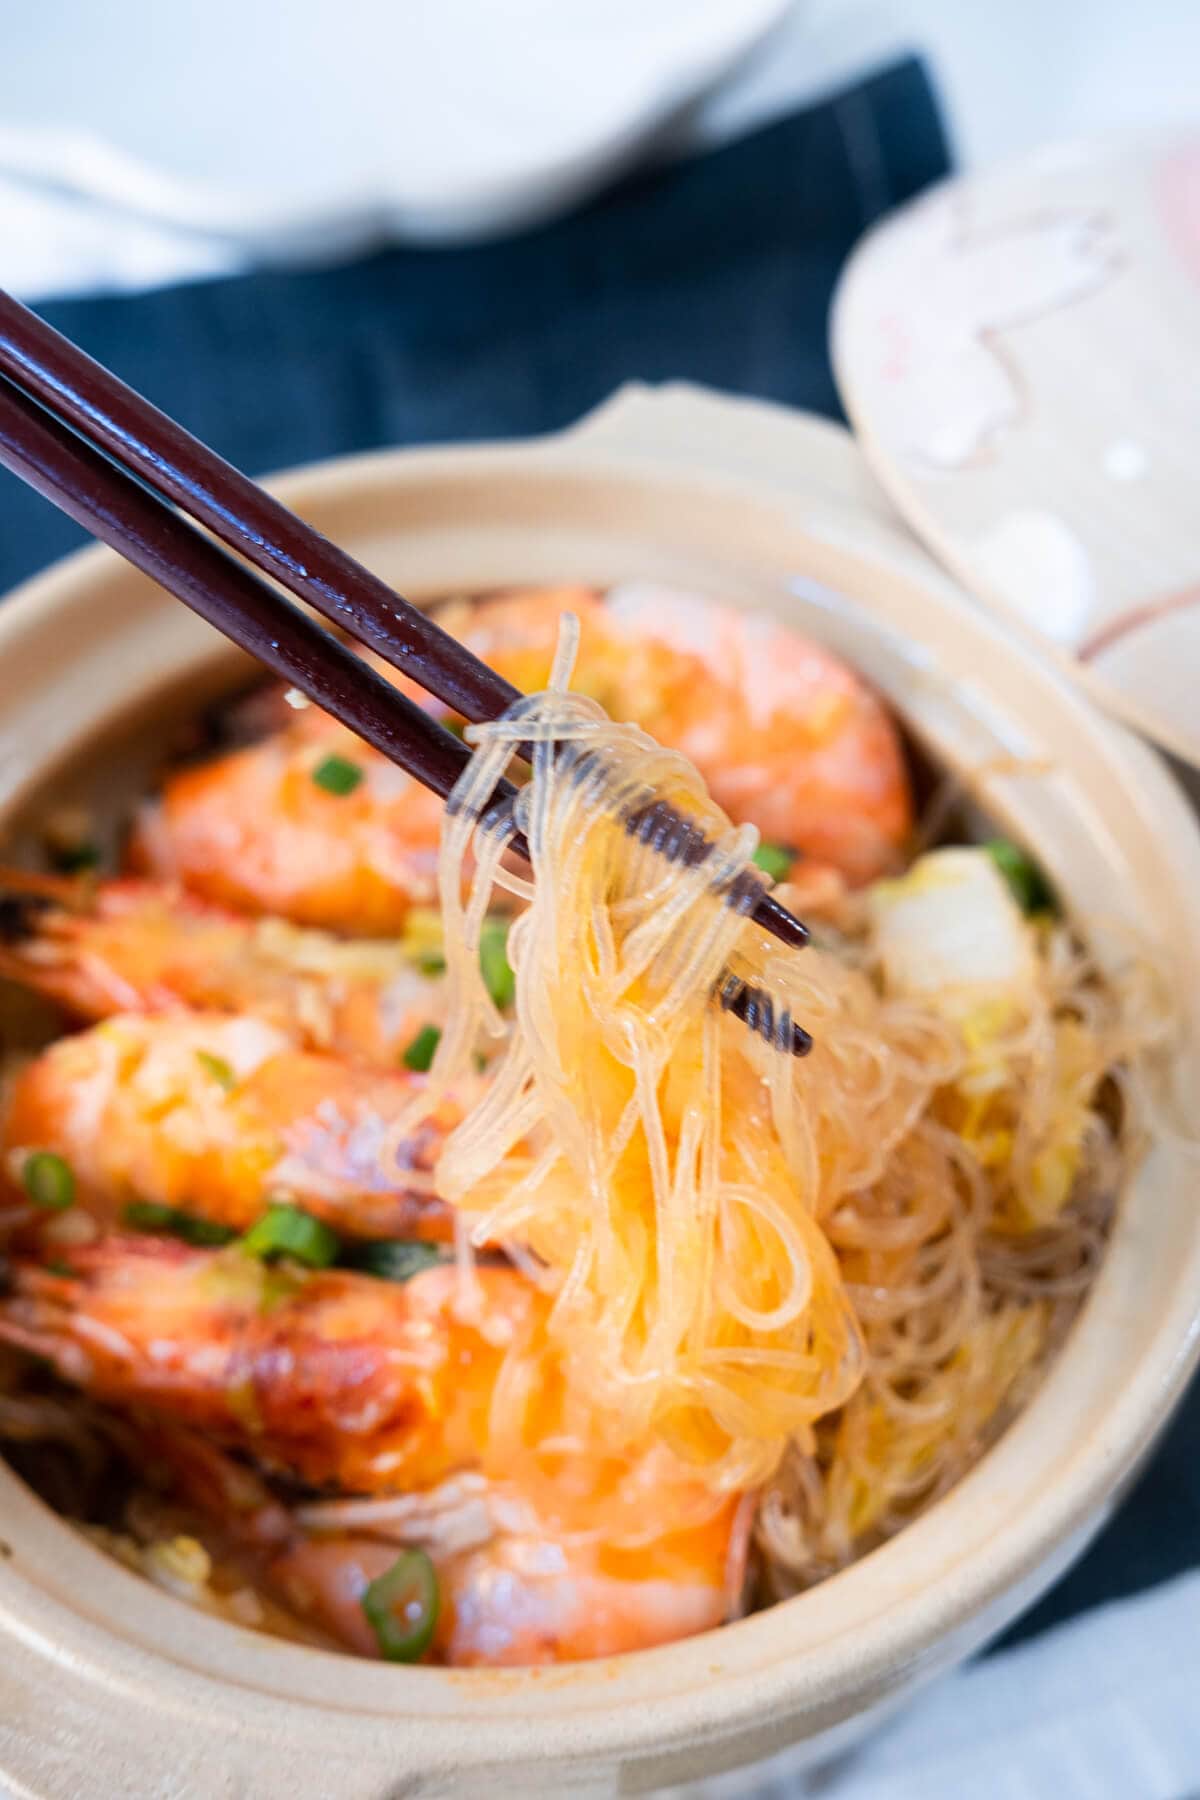 Glass noodles are picked up by chopsticks. 